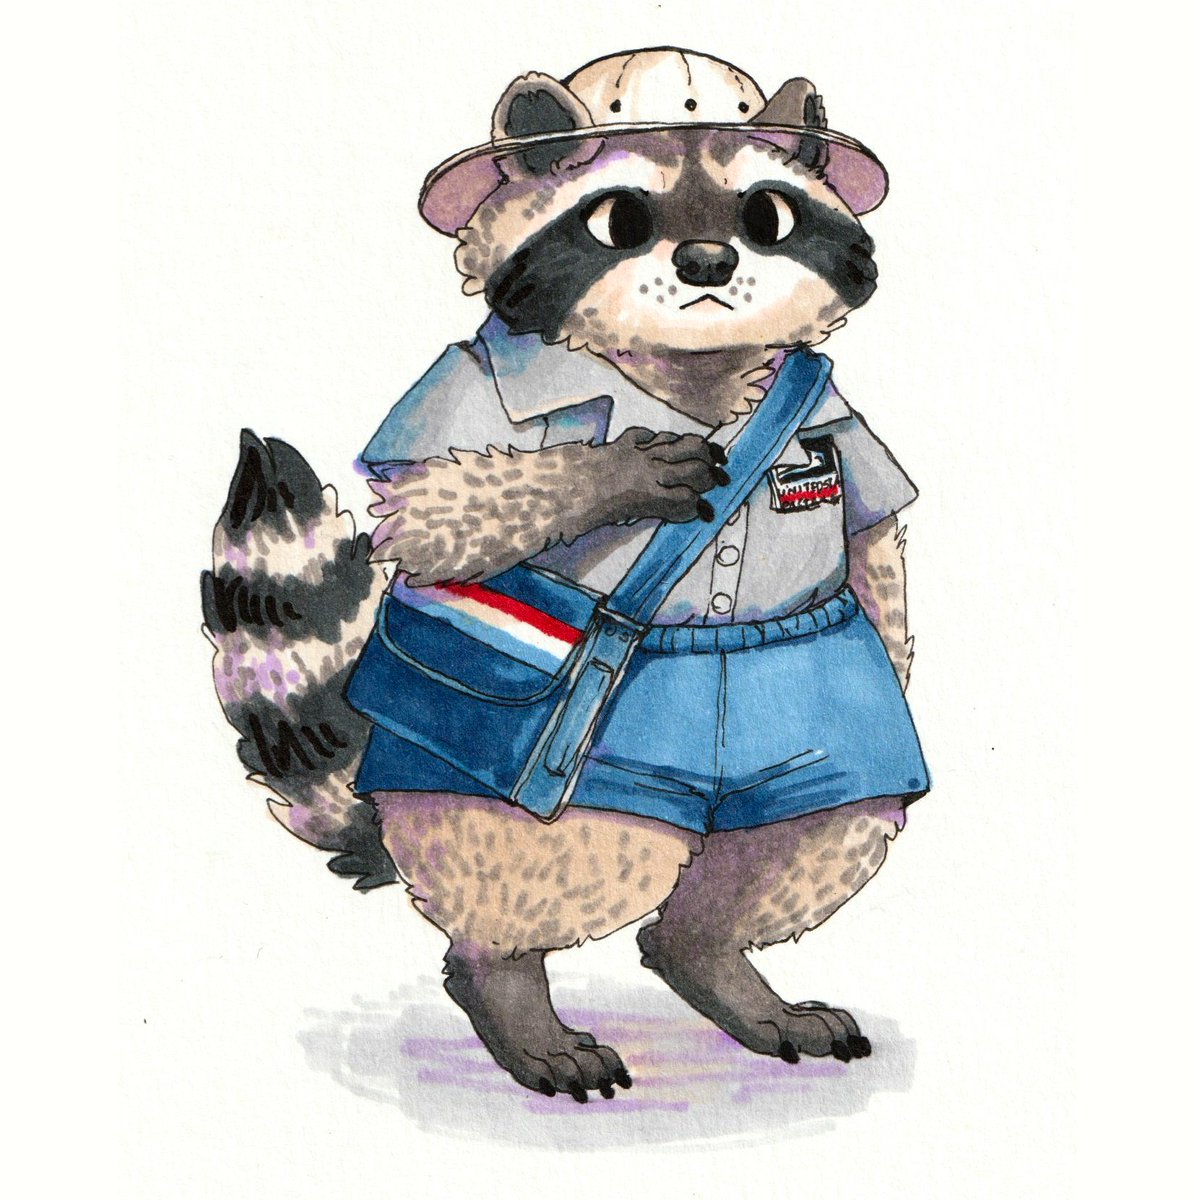 brining back my little postal raccoon for #NationalPostalWorkersDay !!!!! 🦝💌📨 #MailedIt